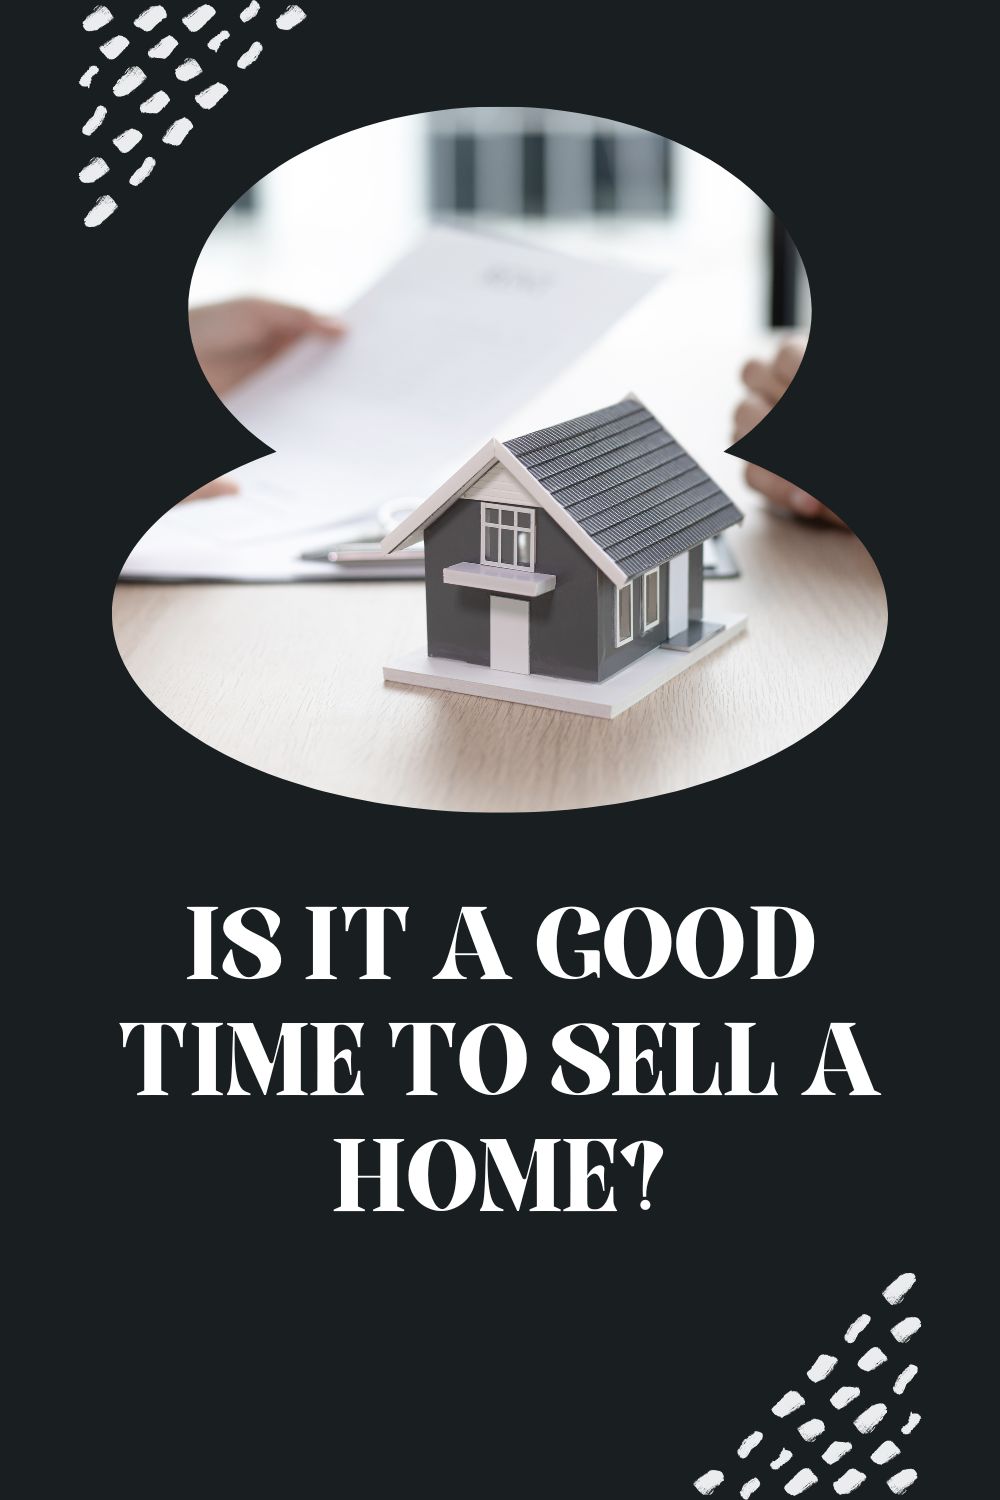 Is It A Good Time to Sell a Home?